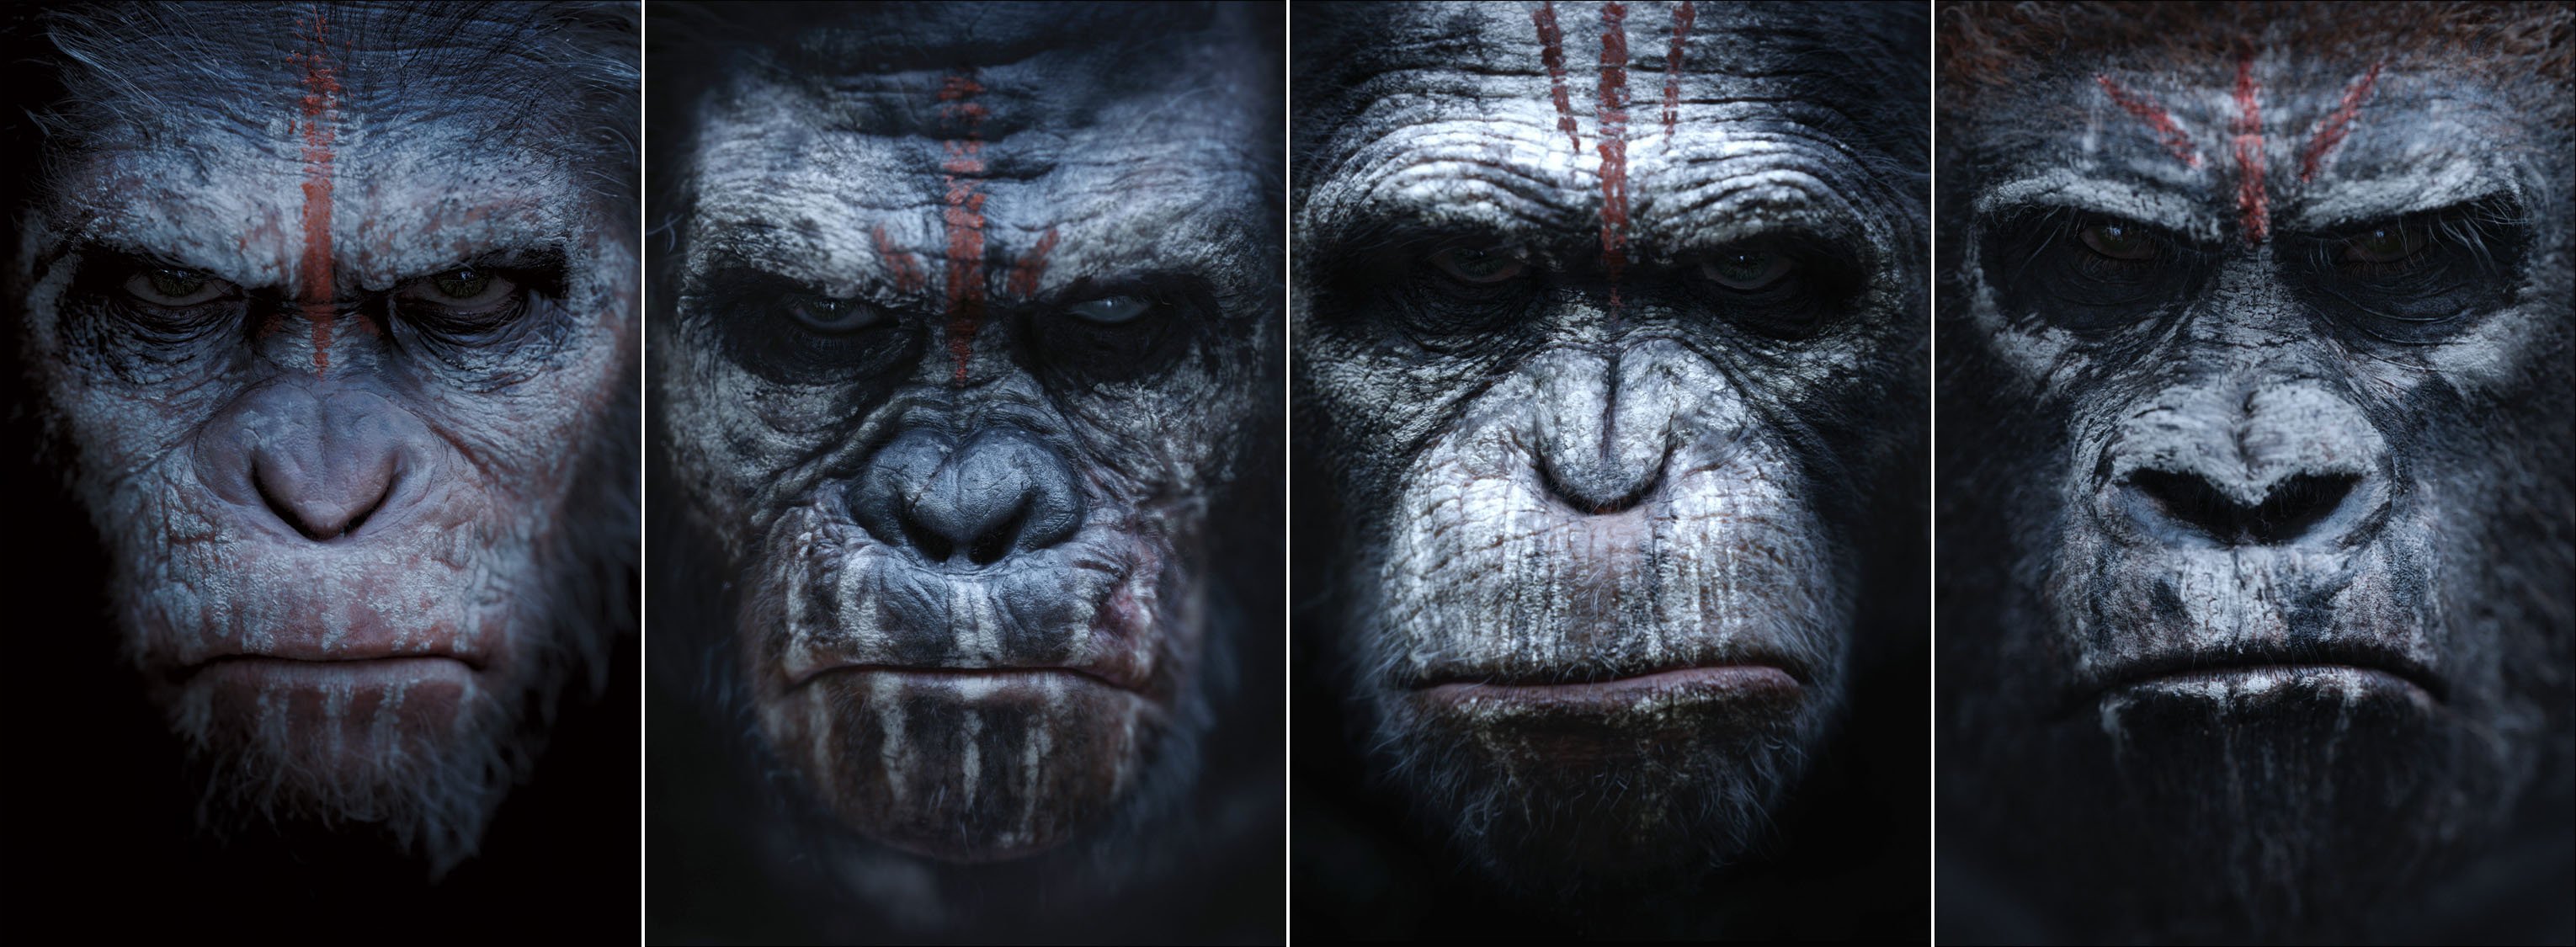 dawn of the apes, Action, Drama, Sci fi, Dawn, Planet, Apes, Monkey, Adventure,  64 Wallpaper